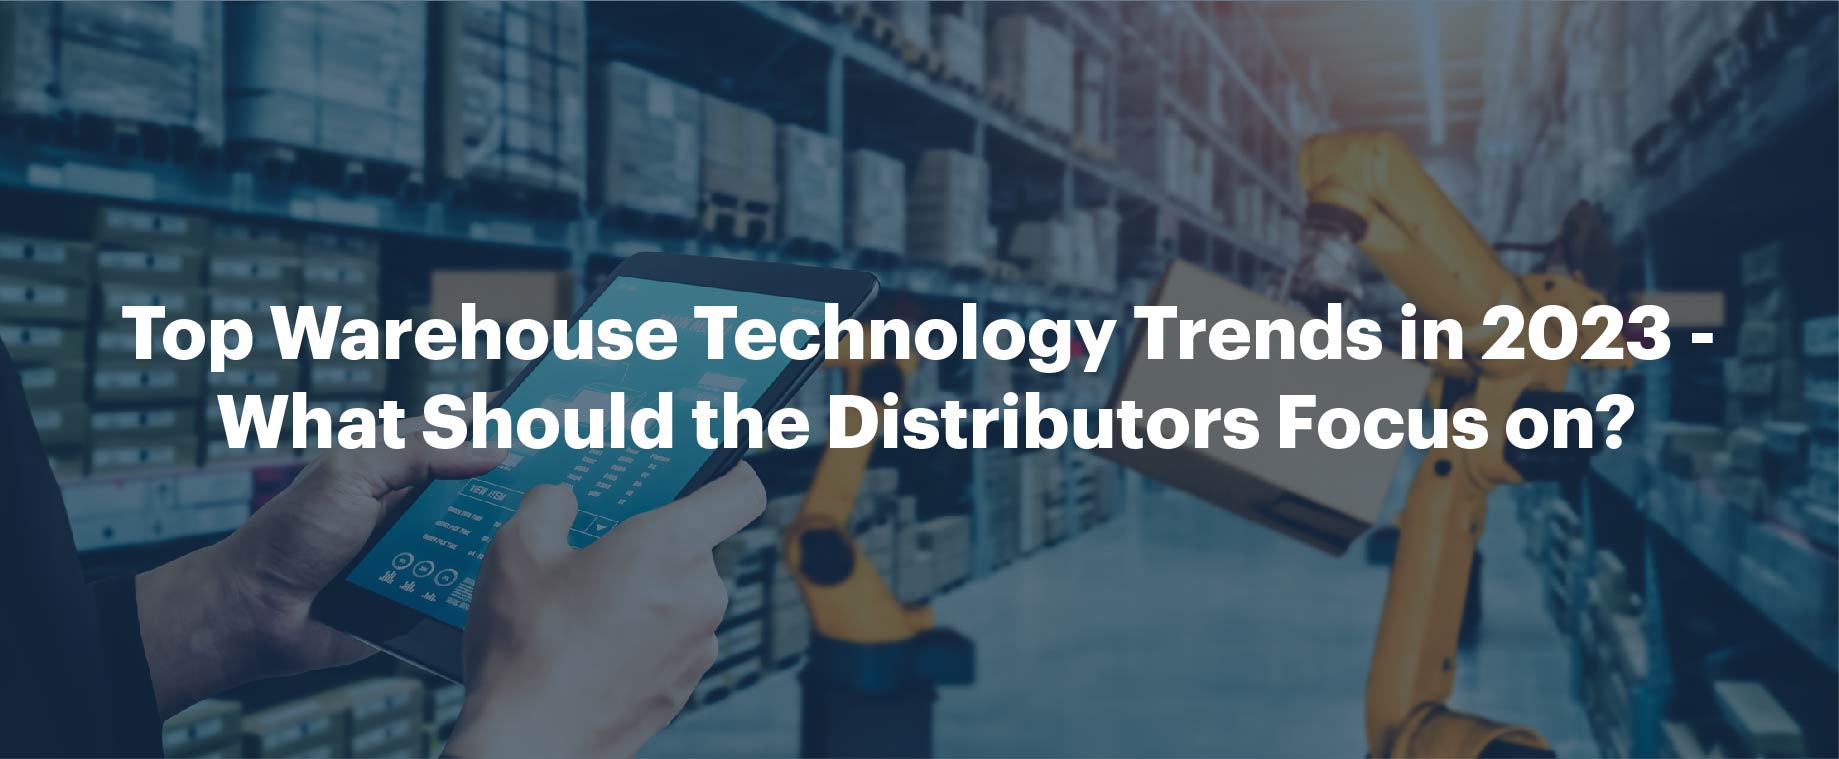 Top Warehouse Technology Trends in 2023 - What Should the Distributors Focus on?